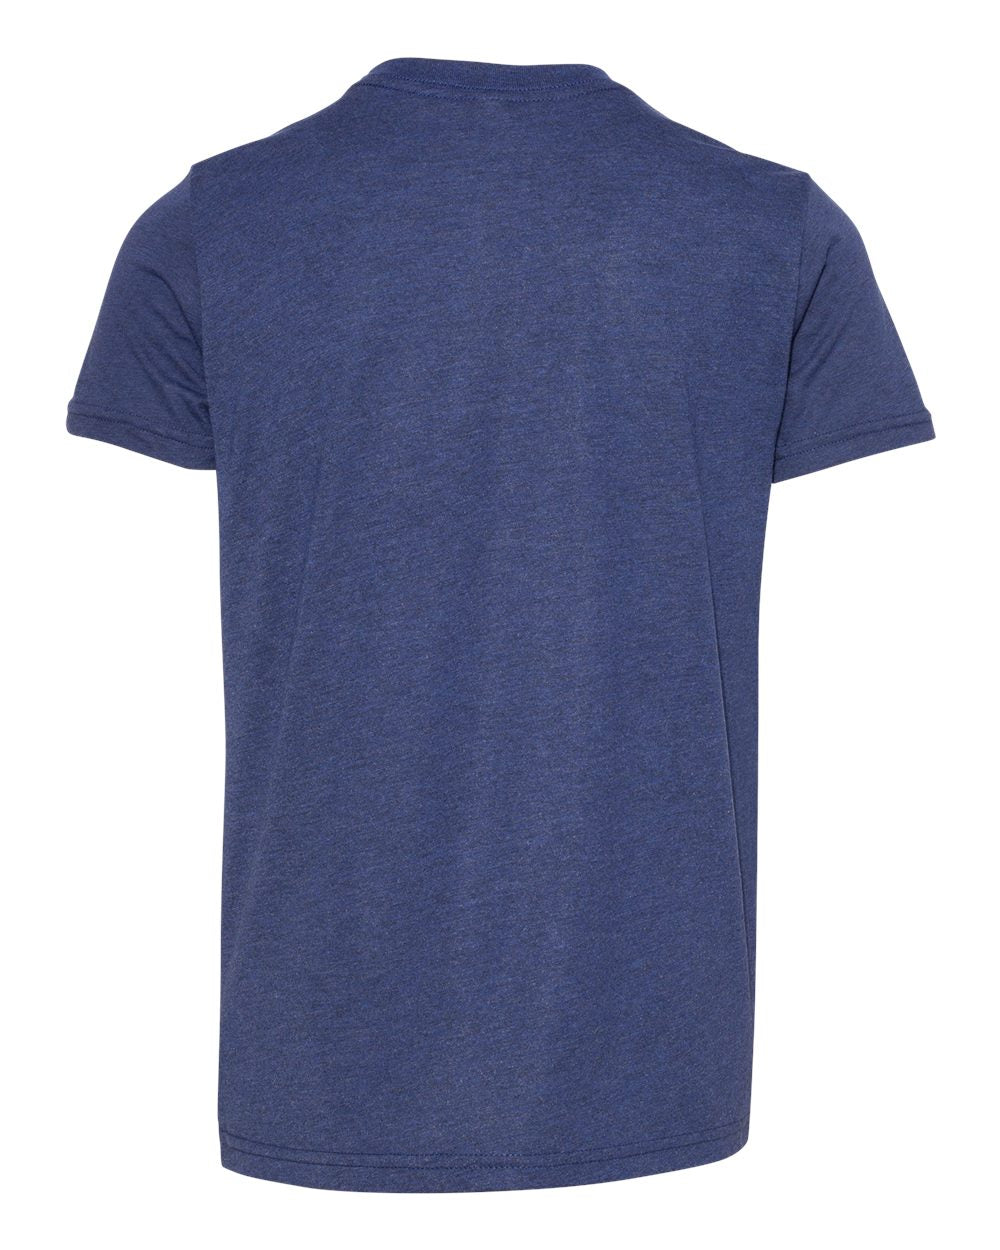 BELLA + CANVAS Youth Triblend Tee 3413Y #color_Navy Triblend